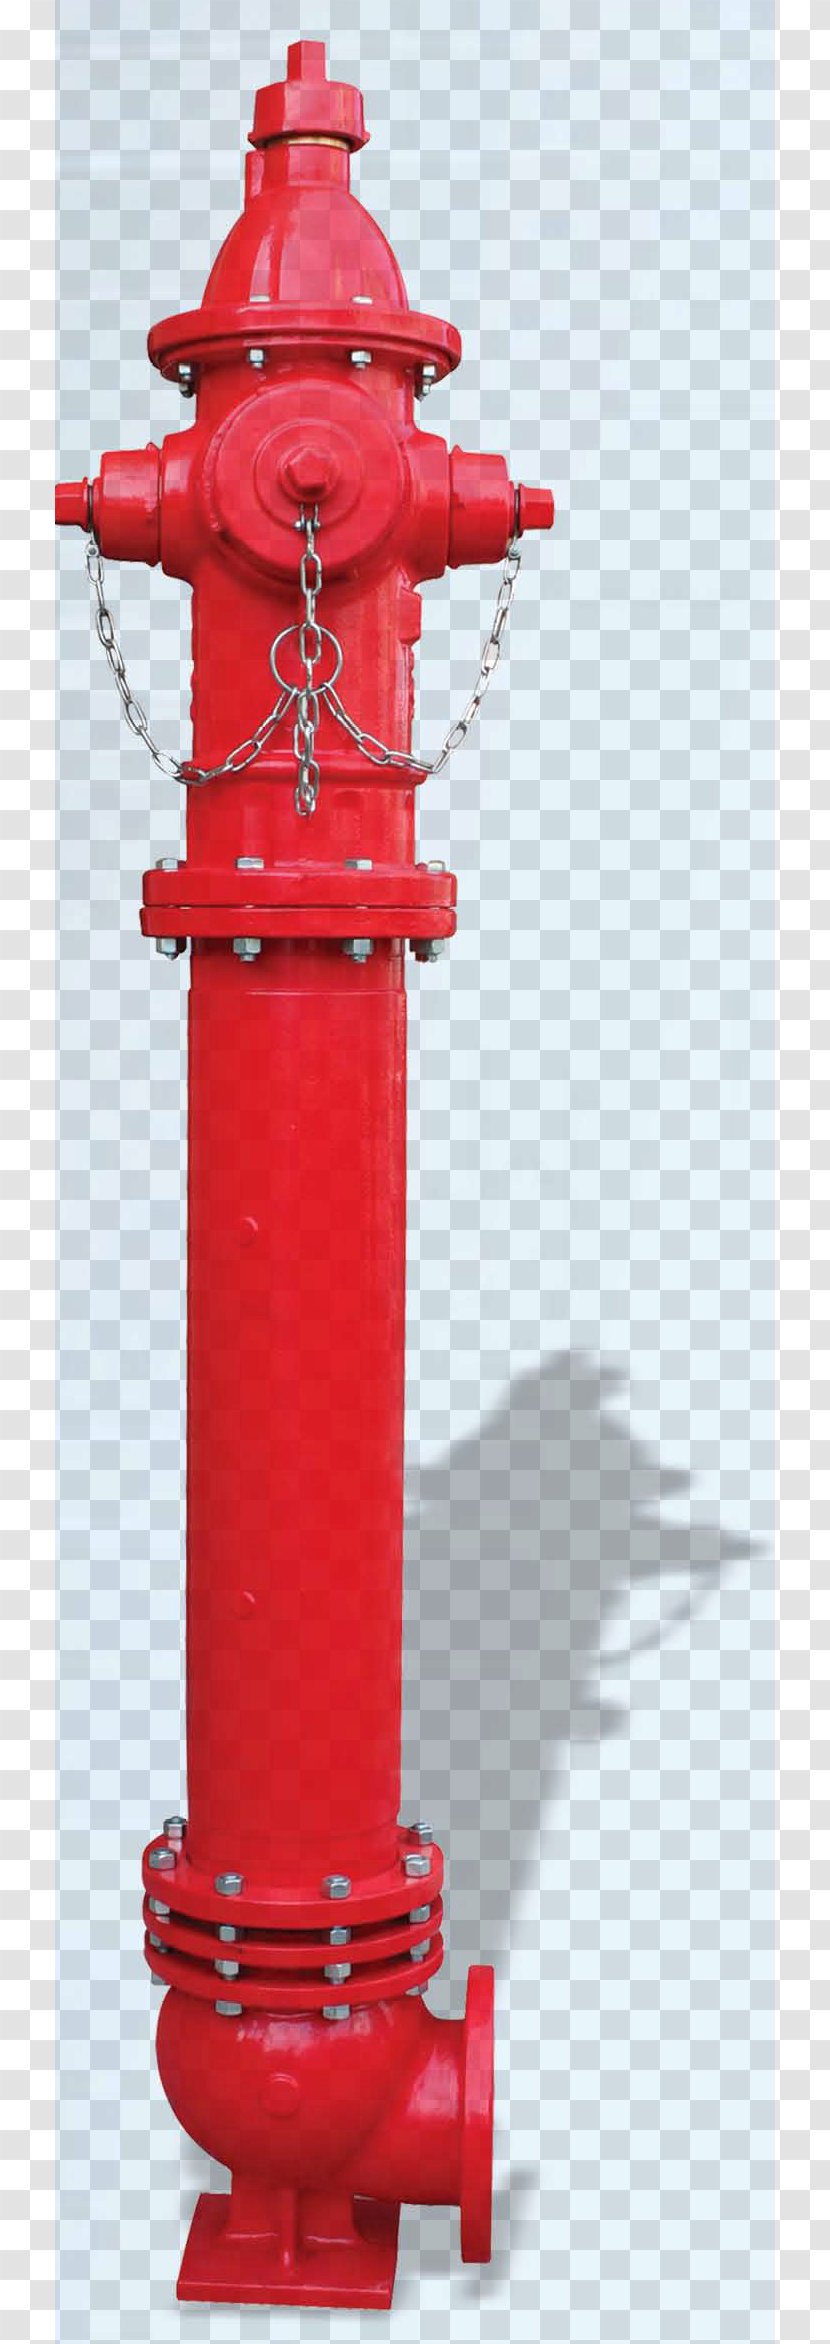 Fire Hydrant Conflagration Protection Valve - Piping Transparent PNG